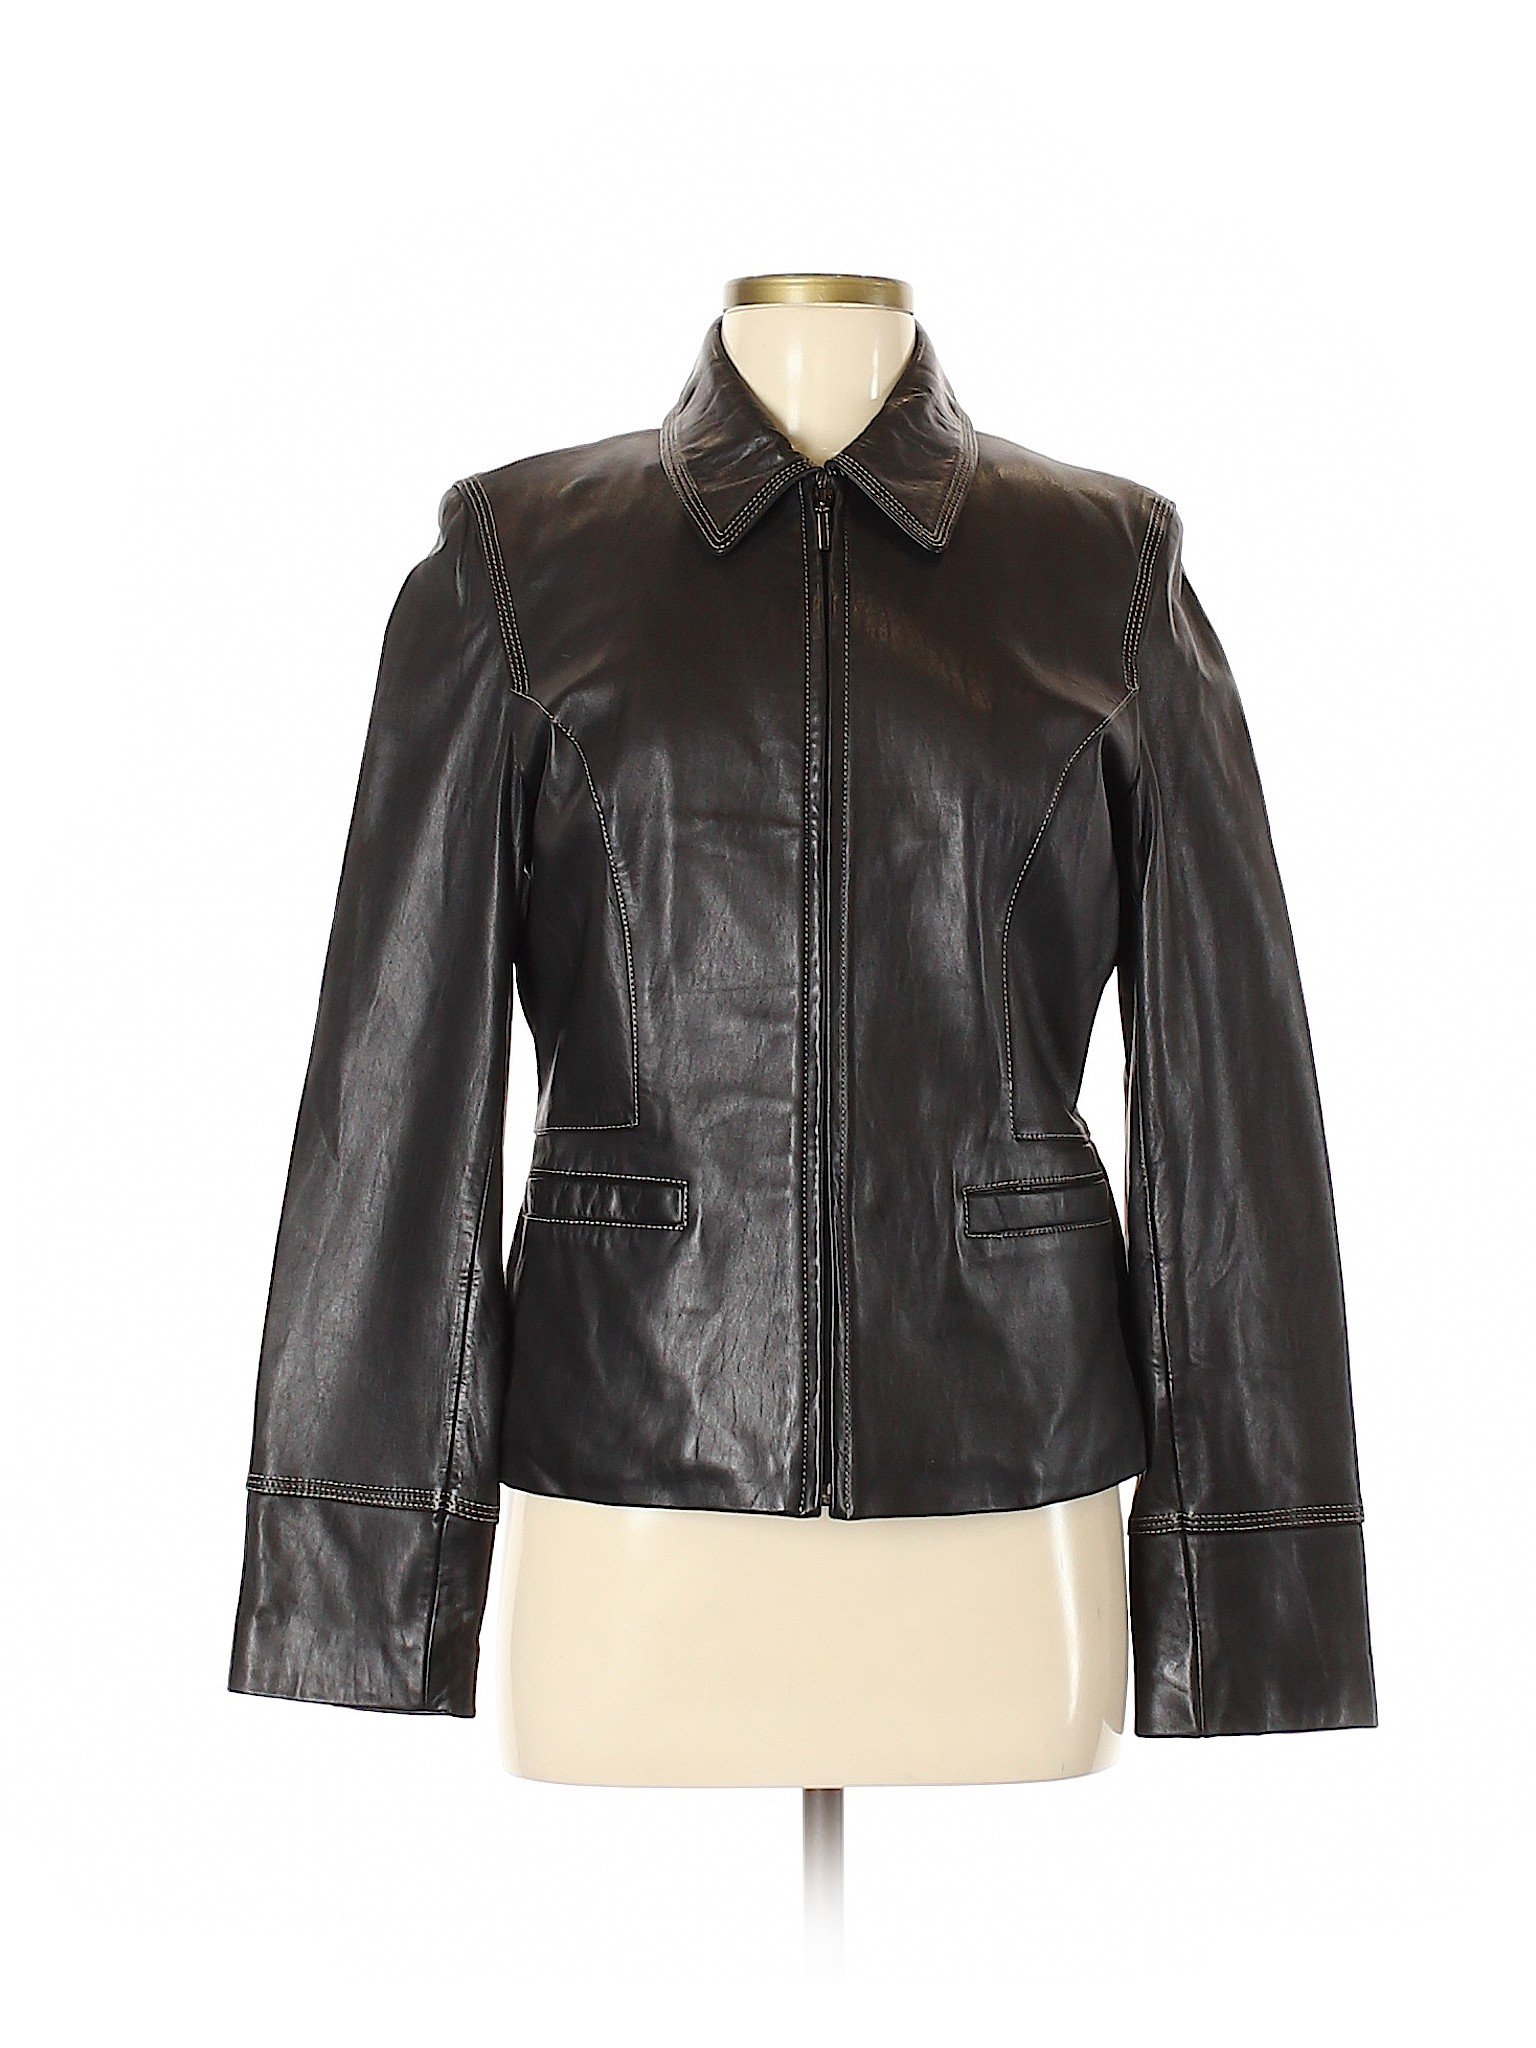 Kenneth Cole Reaction Leather Jacket Womens - Cairoamani.com